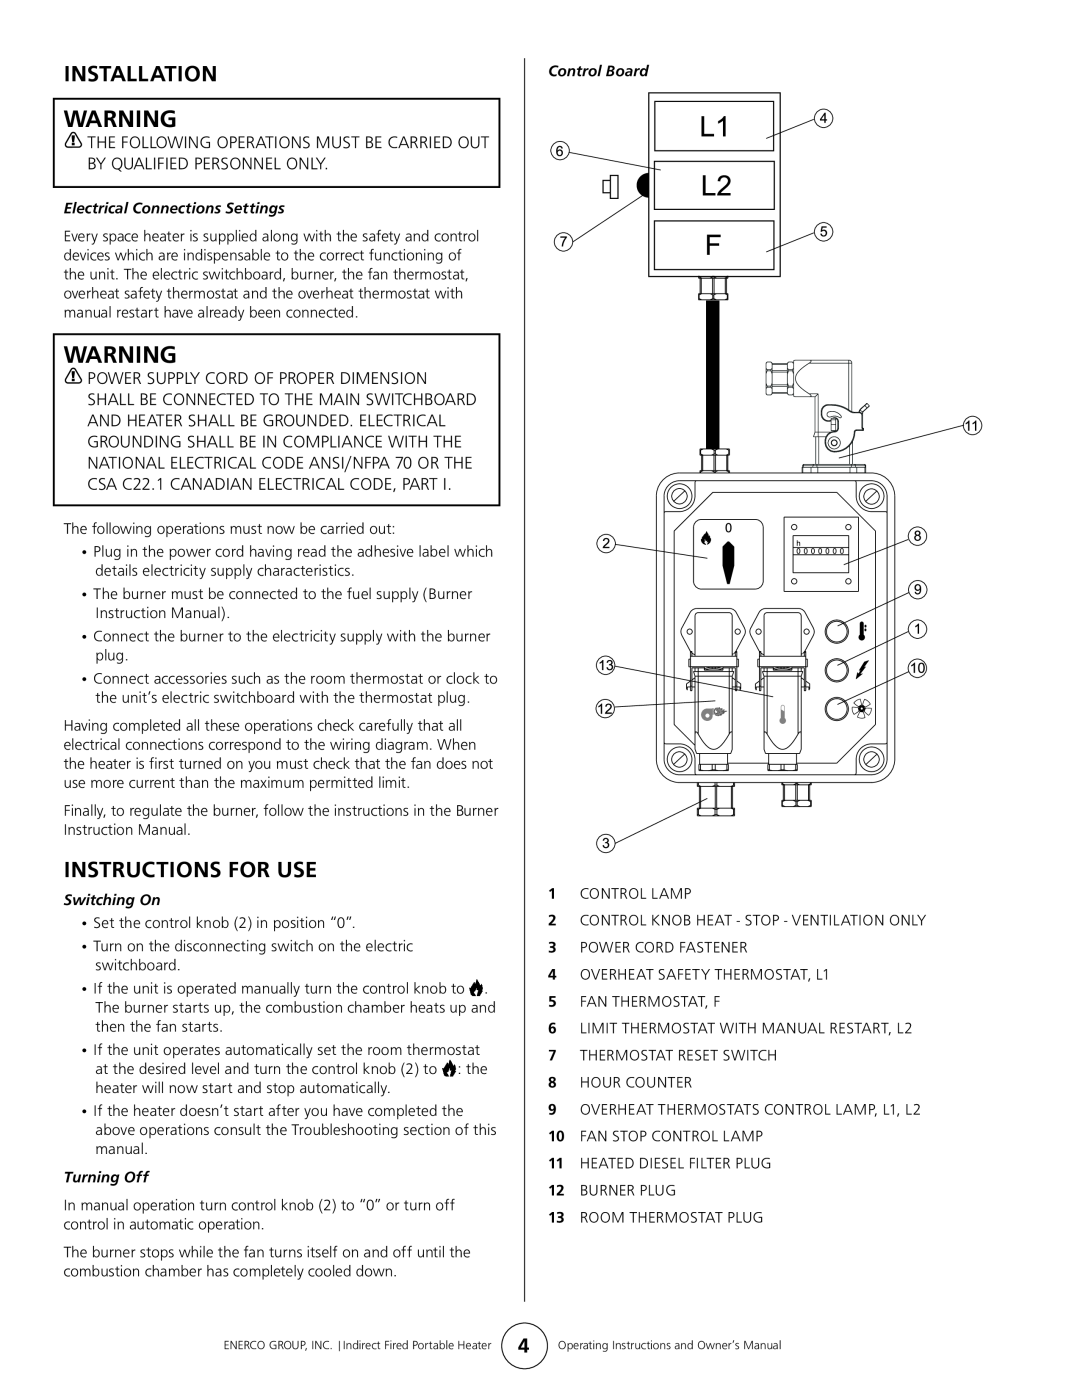 Enerco 7000ID owner manual Installation, Instructions For Use, Electrical Connections Settings, Switching On, Turning Off 